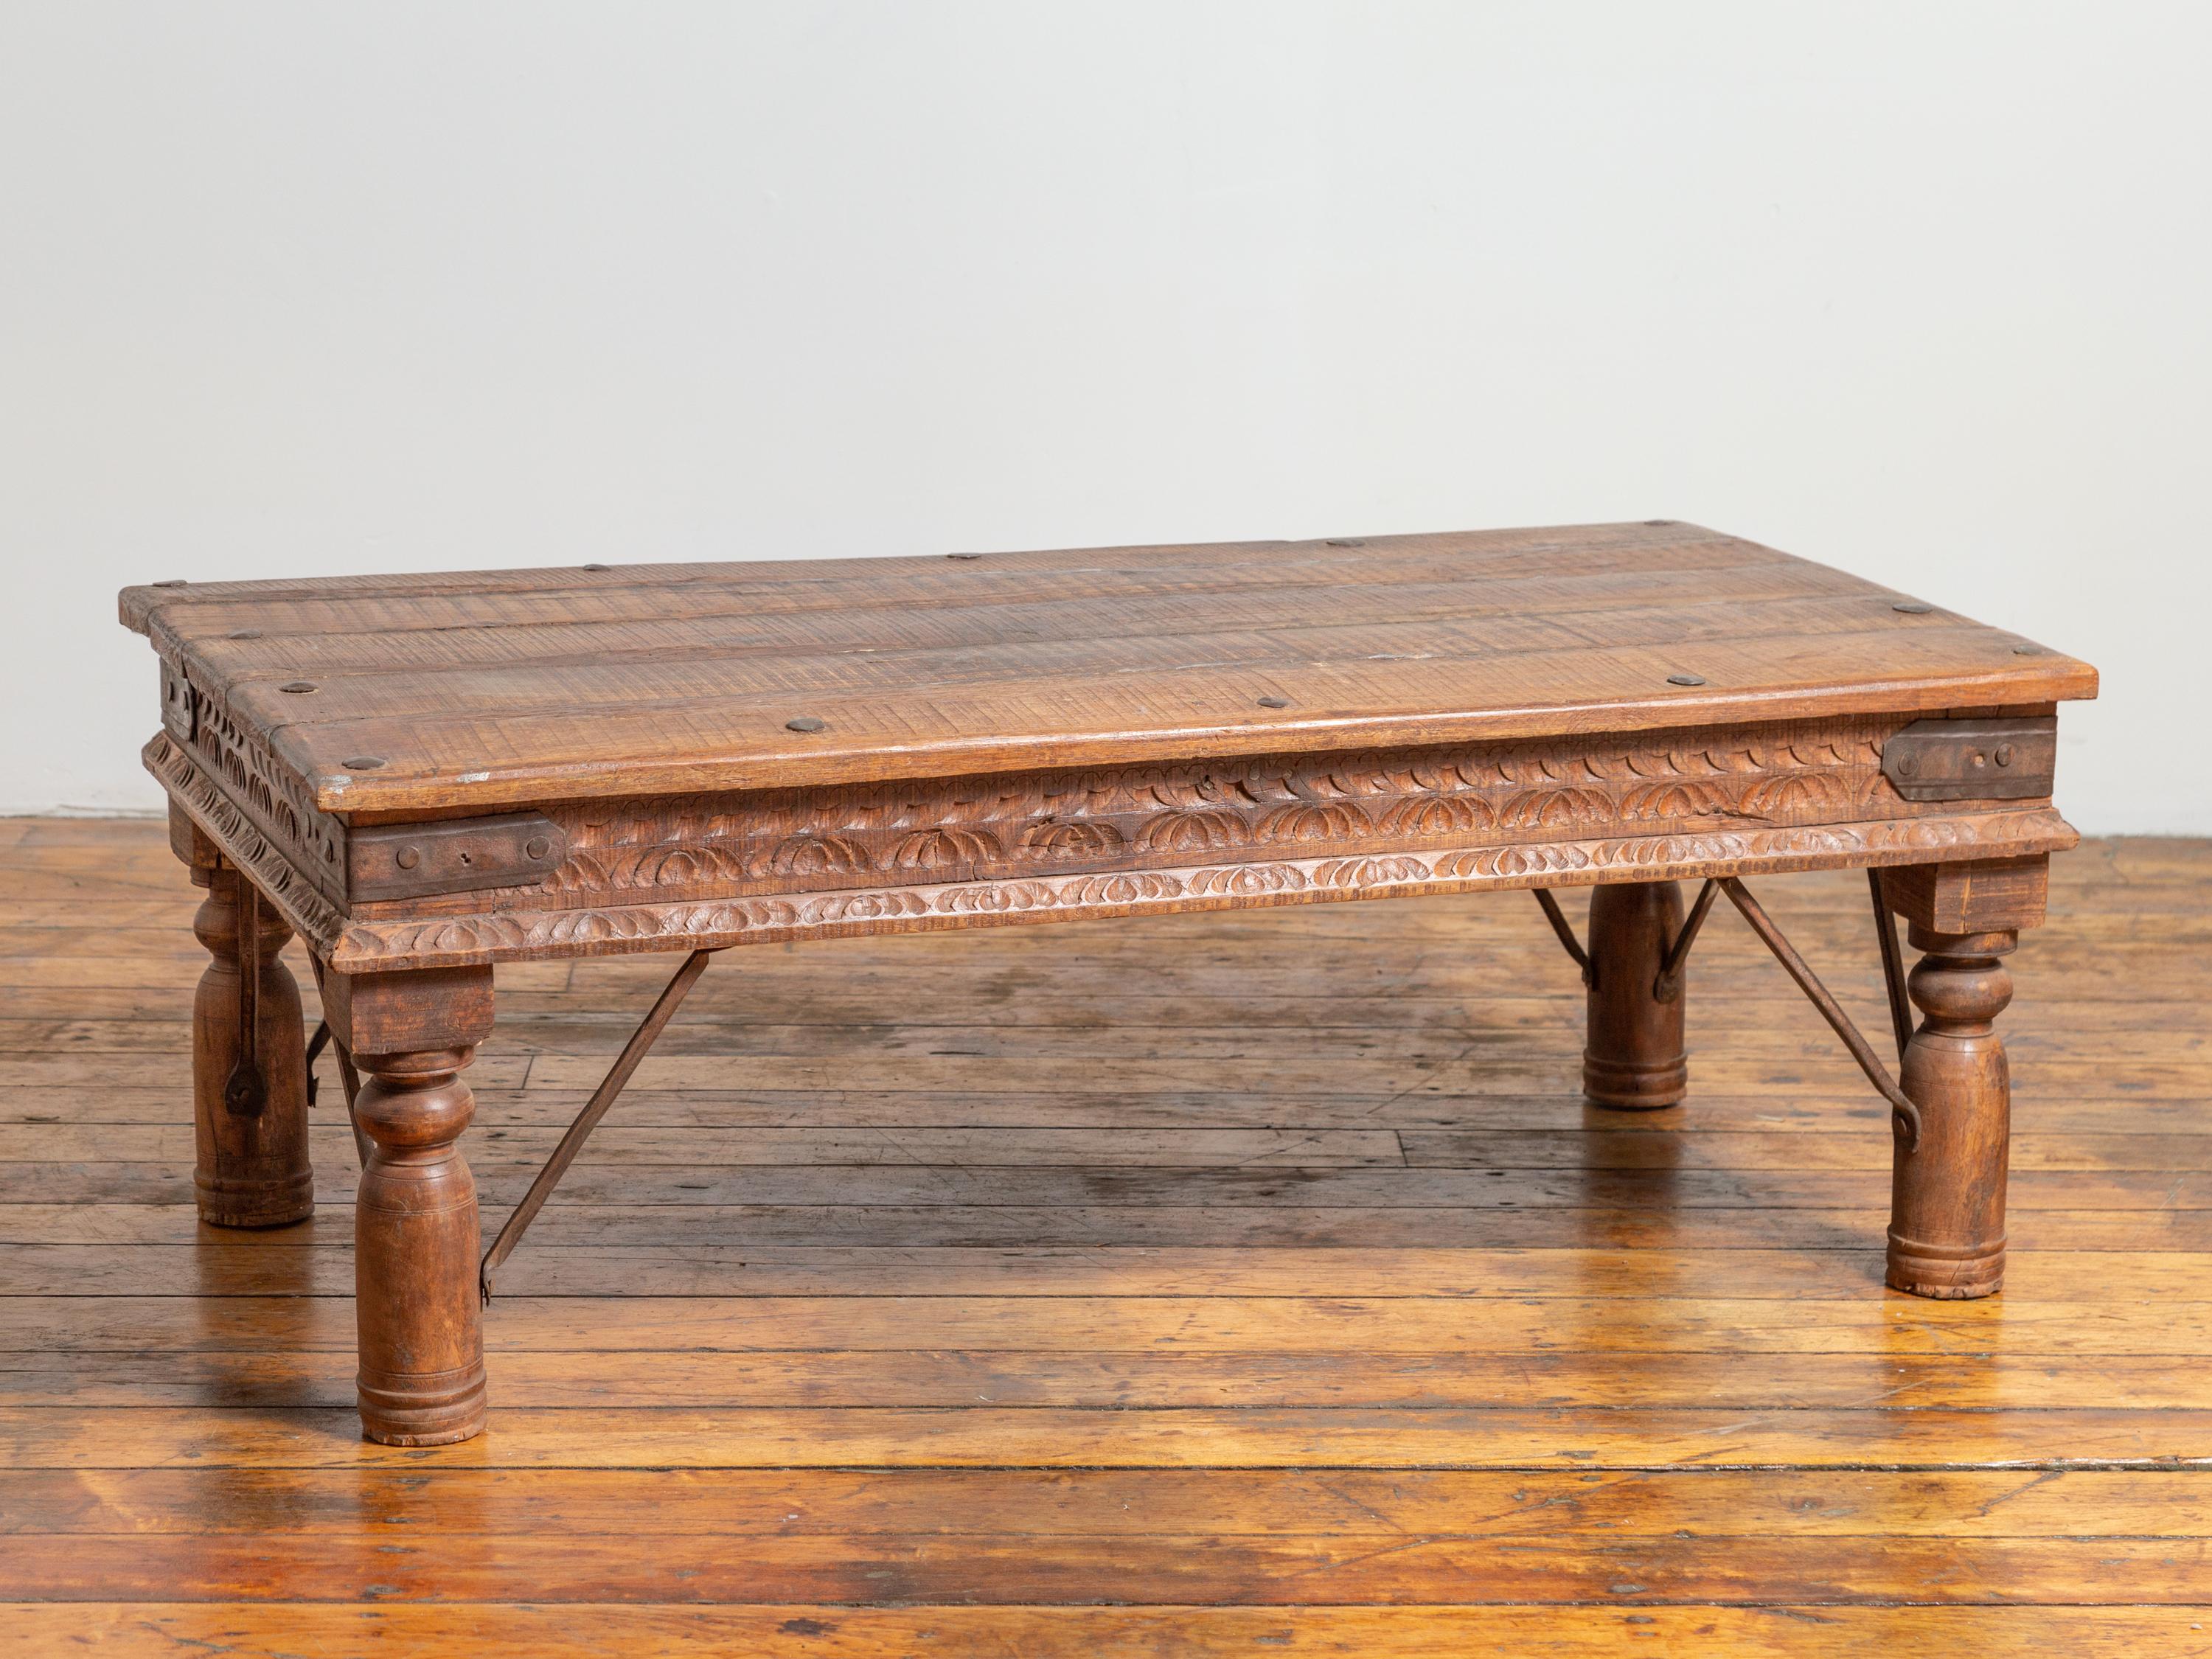 19th Century Indian Rustic Low Coffee Table with Carved Apron and Iron Accents 1